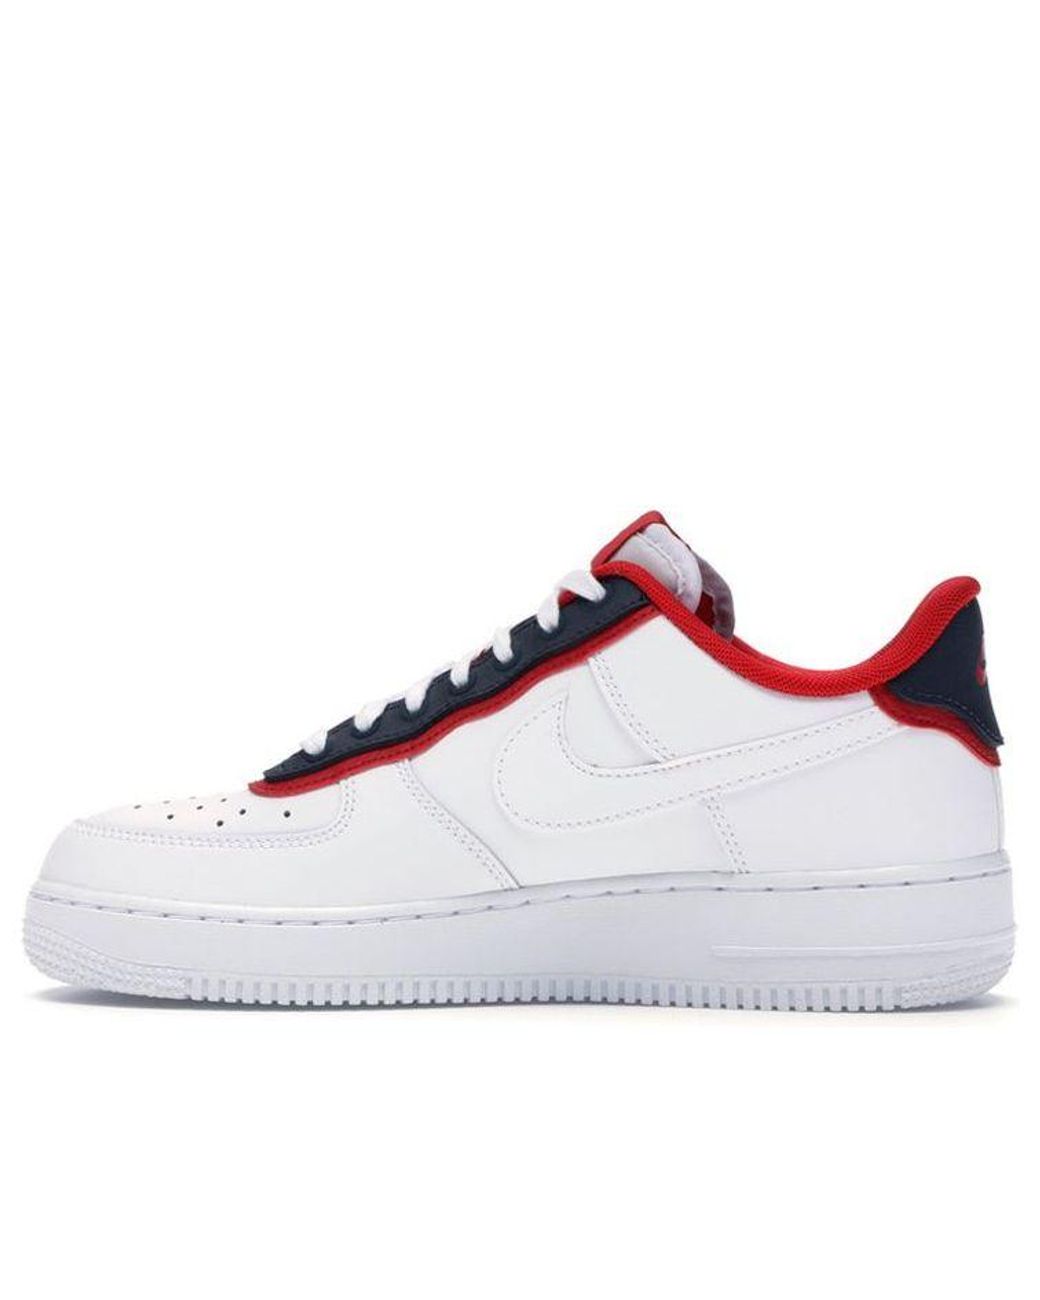 Nike Air Force 1 Double Swoosh Light Ginger